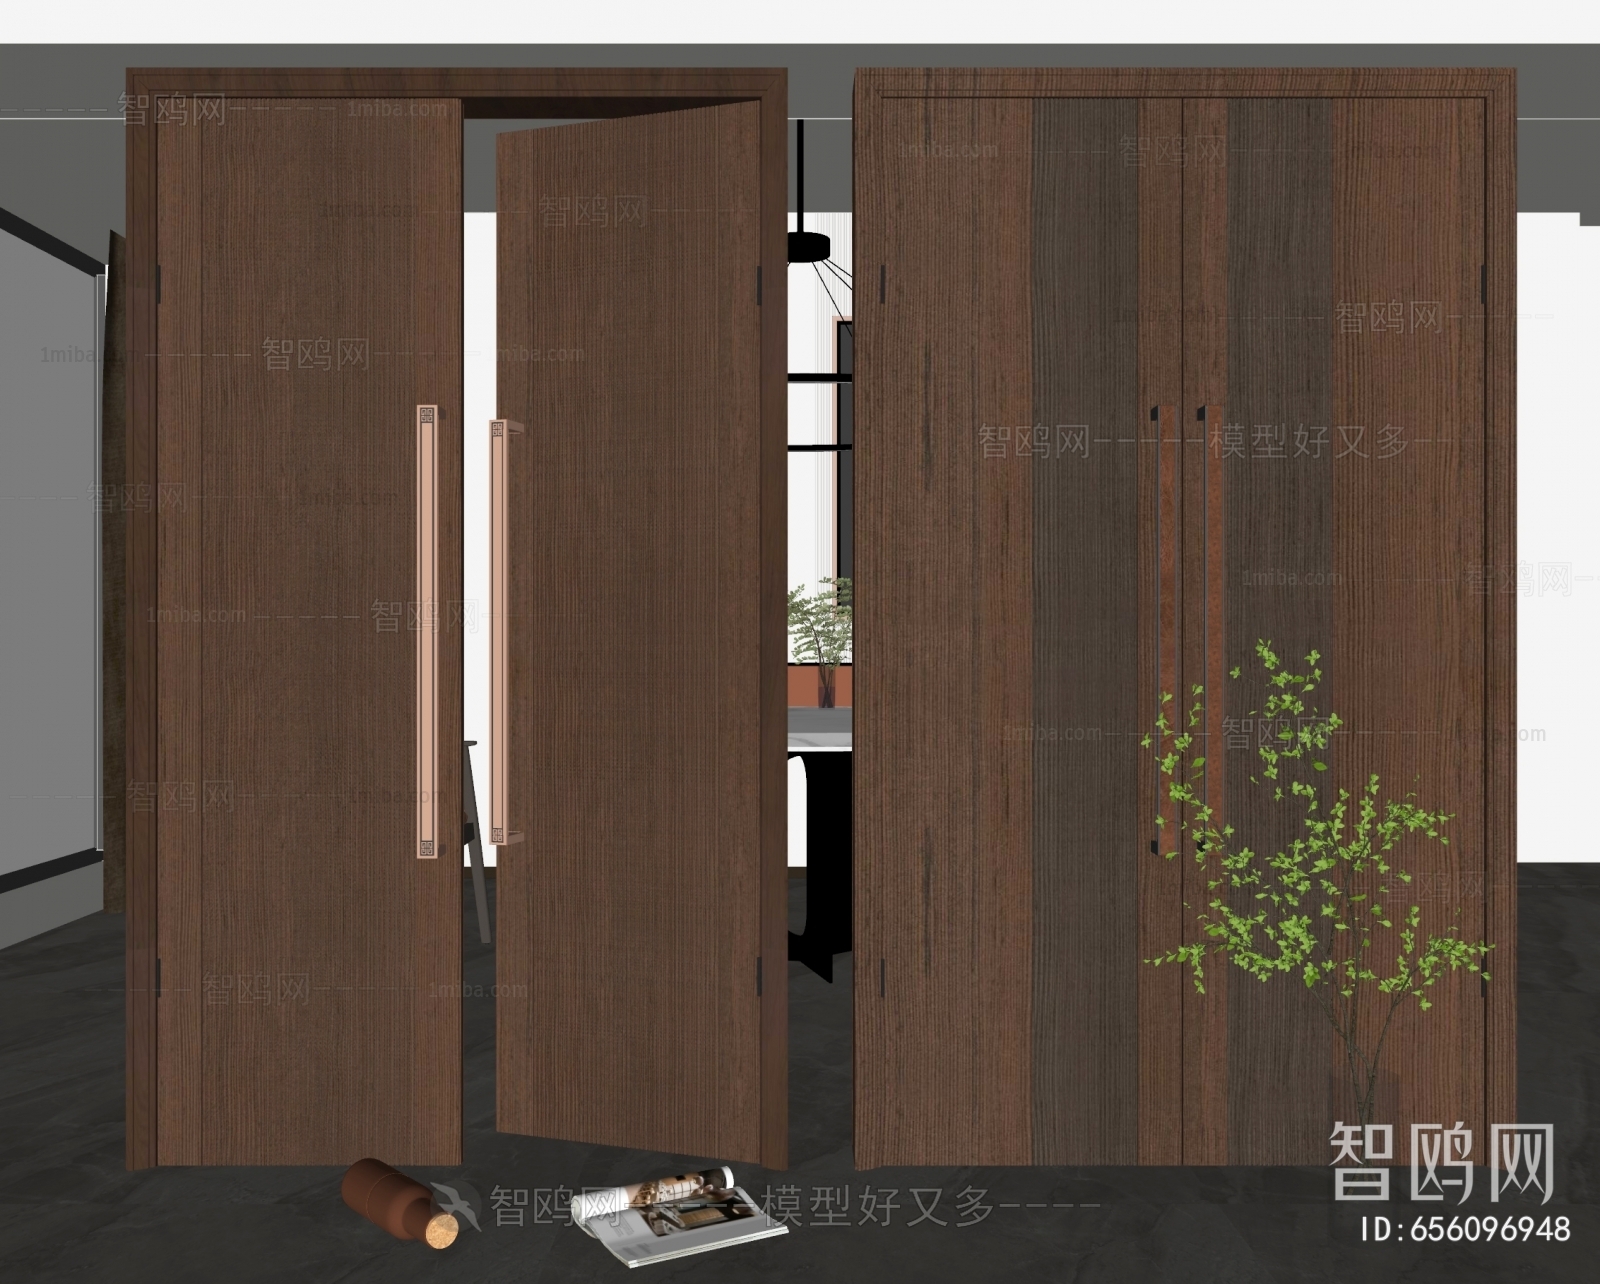 New Chinese Style Entrance Door